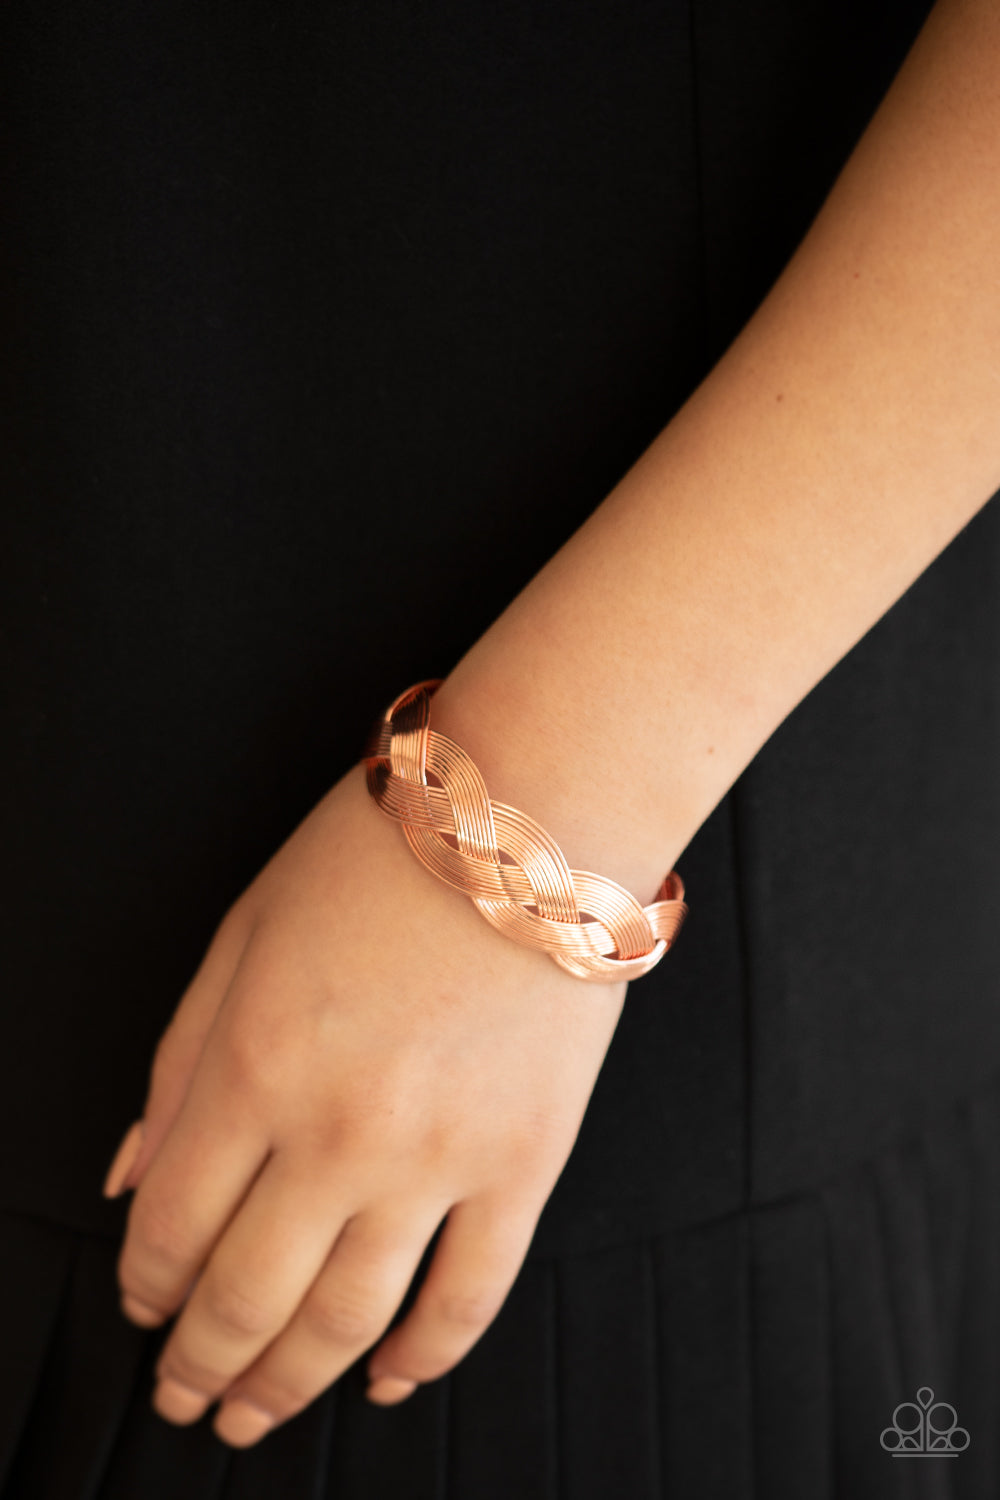 Woven Wonder - Copper Cuff Bracelets attached to two shiny copper fittings, rows of dainty shiny copper wire weave around the wrist, creating a boldly braided cuff.  Sold as one individual bracelet.